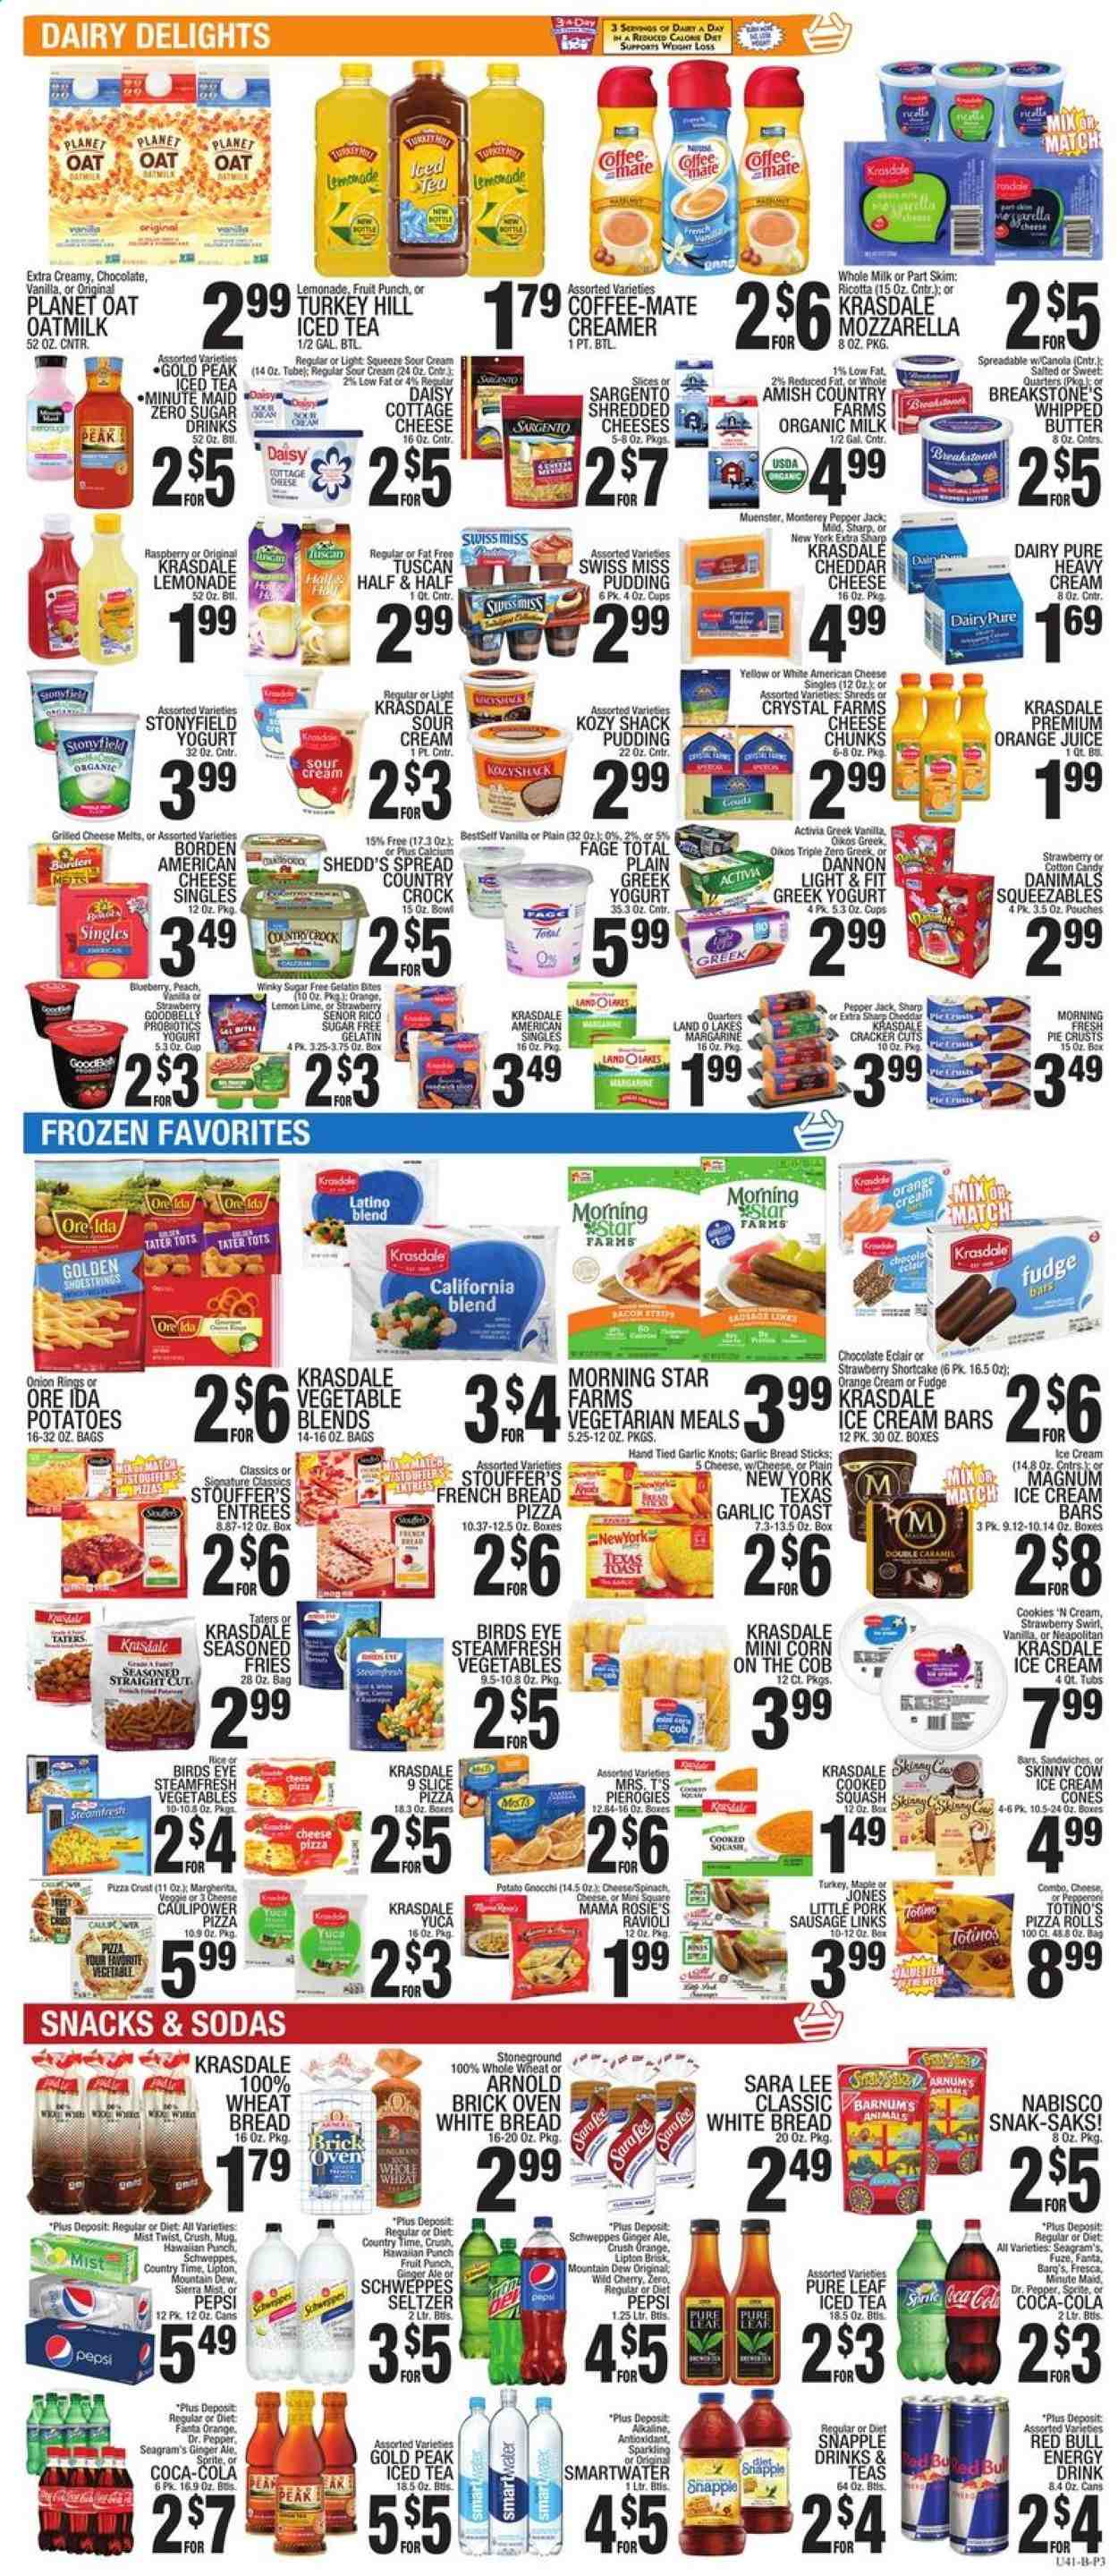 thumbnail - C-Town Flyer - 01/22/2021 - 01/28/2021 - Sales products - wheat bread, white bread, pizza rolls, toast bread, Sara Lee, pie, gnocchi, pizza, onion rings, sandwich, Bird's Eye, sausage, pepperoni, american cheese, cottage cheese, mozzarella, ricotta, cheddar, Pepper Jack cheese, cheese, Münster cheese, Sargento, greek yoghurt, pudding, yoghurt, probiotic yoghurt, Activia, Oikos, Dannon, Danimals, Coffee-Mate, organic milk, oat milk, margarine, whipped butter, sour cream, creamer, ice cream, ice cream bars, corn, spinach, Stouffer's, potato fries, Ore-Ida, cookies, fudge, chocolate, cotton candy, crackers, Swiss Miss, snack, pie crust, oats, ravioli, pork sausage, Coca-Cola, ginger ale, lemonade, Mountain Dew, Schweppes, Sprite, Pepsi, orange juice, juice, Fanta, energy drink, Lipton, Dr. Pepper, Diet Pepsi, Red Bull, Snapple, Sierra Mist, Country Time, seltzer water, Pure Leaf. Page 3.